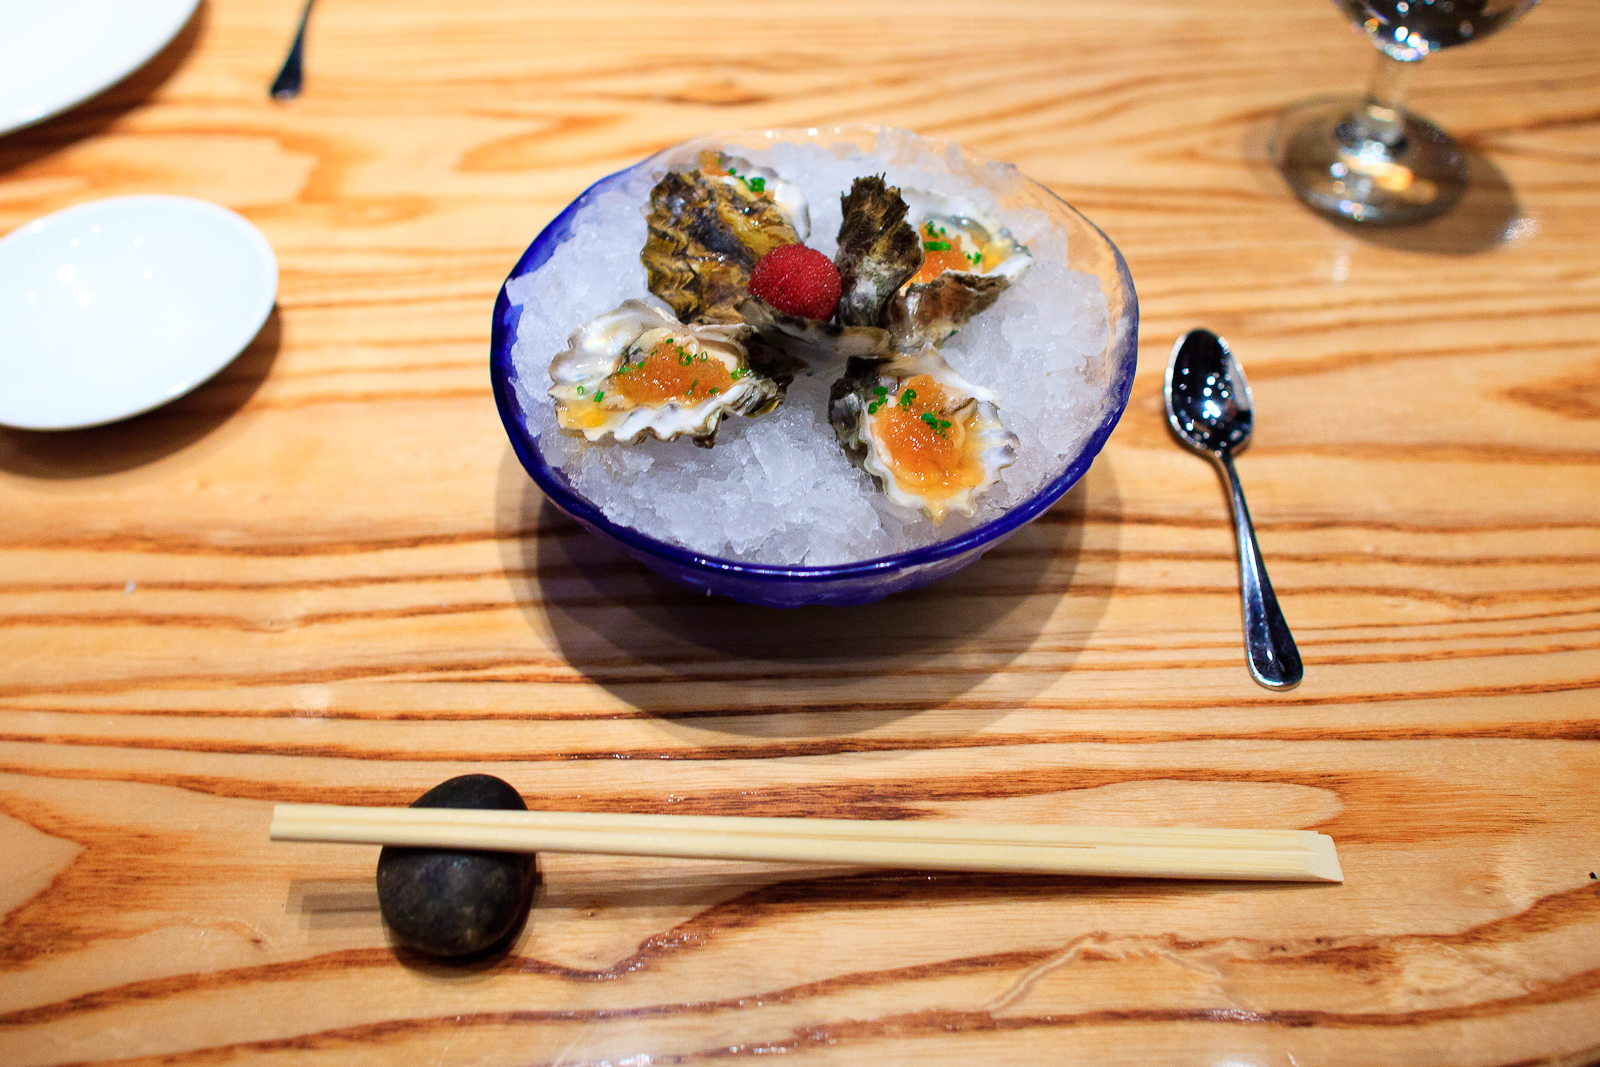 Ostiones con salsa Nobu (oysters with nobu sauces) (140 MXP)